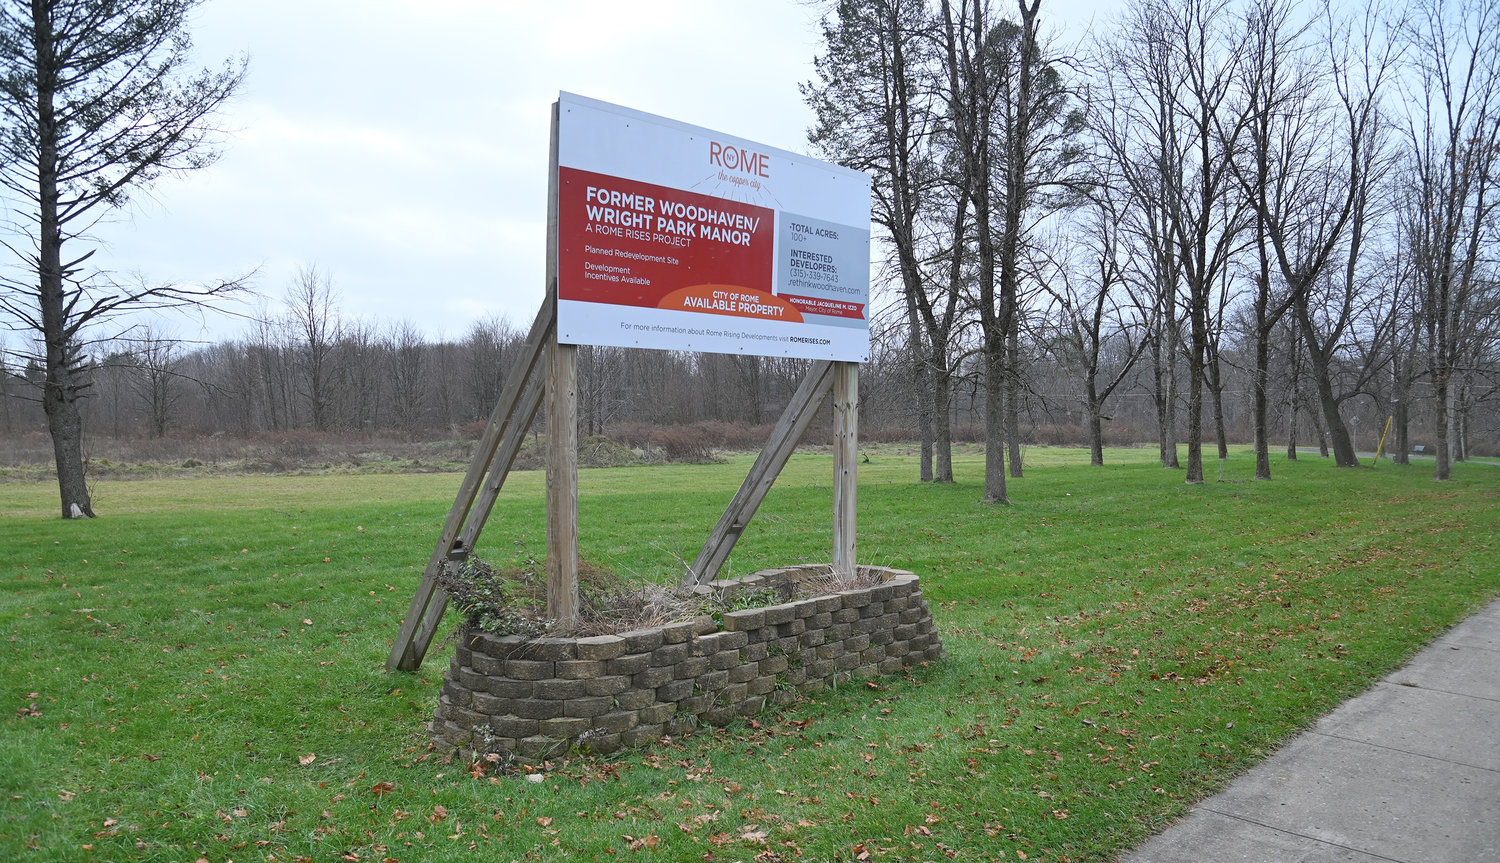 The former Wright Park Manor site on Upper Floyd Avenue, adjacent to the Woodhaven area, is shown on Thursday, Dec. 1. The area’s redevelopment plan includes being the future site of the YMCA of the Greater Tri-Valley’s Rome Family Y facility.